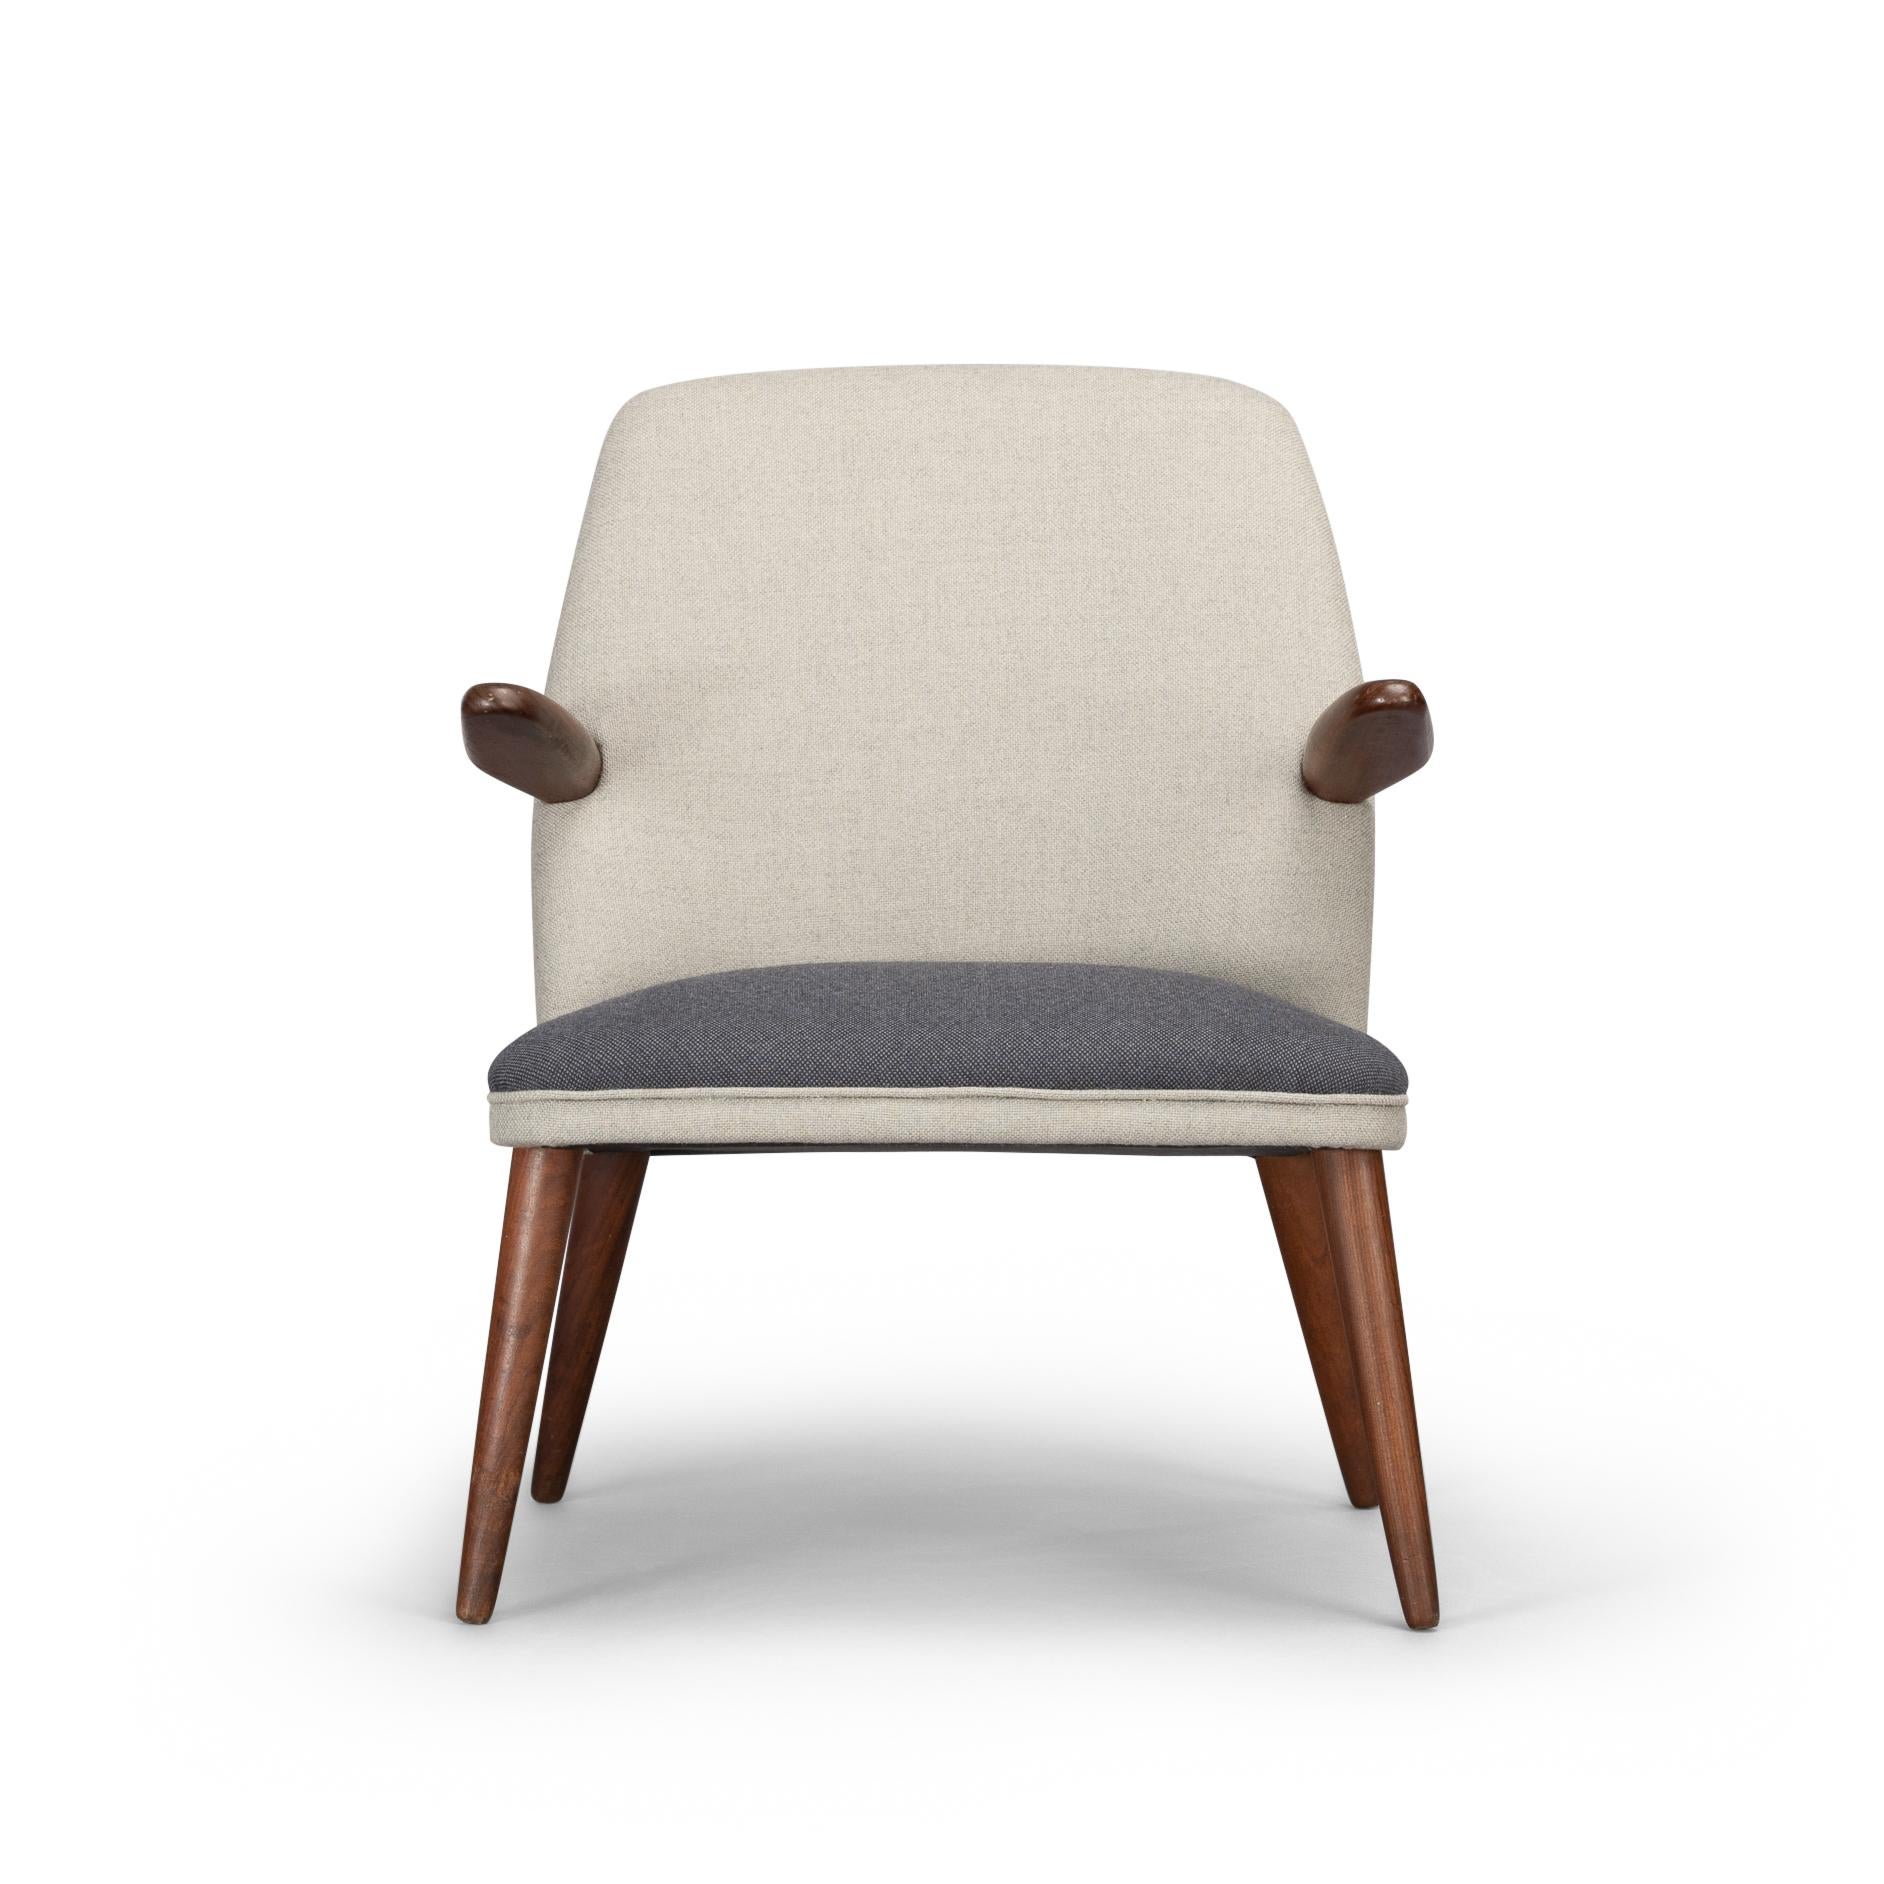 Fab looking early 60s two armed cocktail chair reupholstered in twin colour pure wool fabric. Legs and arms in solid teak and very durable beech internal frame make this a high quality made chair ideal for placement in a living room setting. The